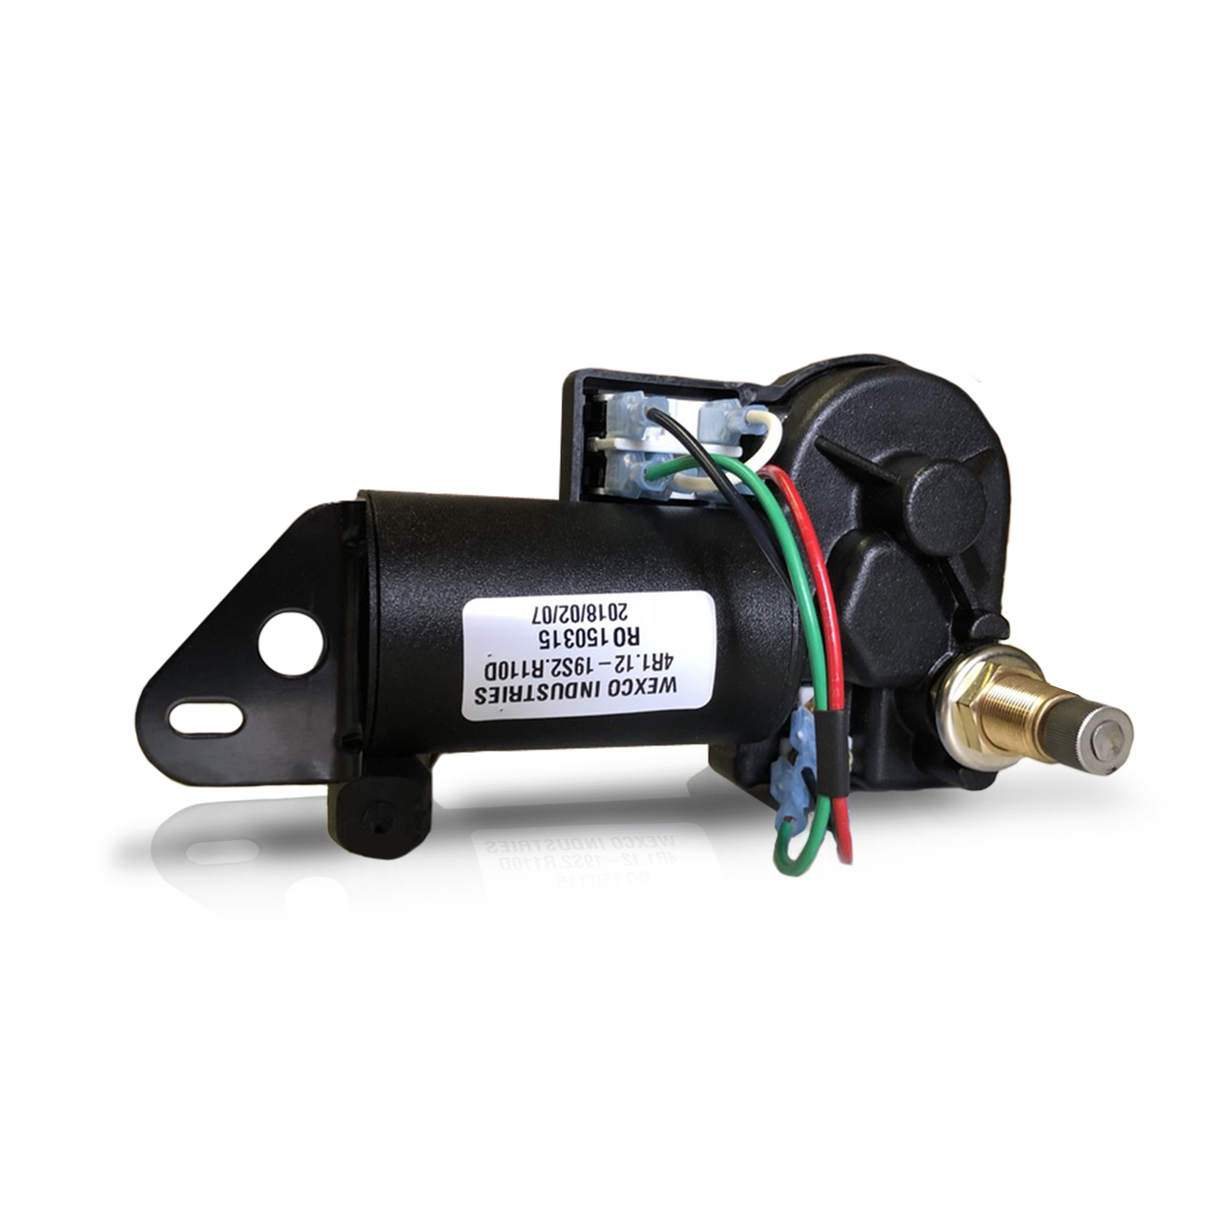 4R1.12-19S2.R110D - One and a half inch (1.5") shaft, 12V With Two-Speed Switch Installed